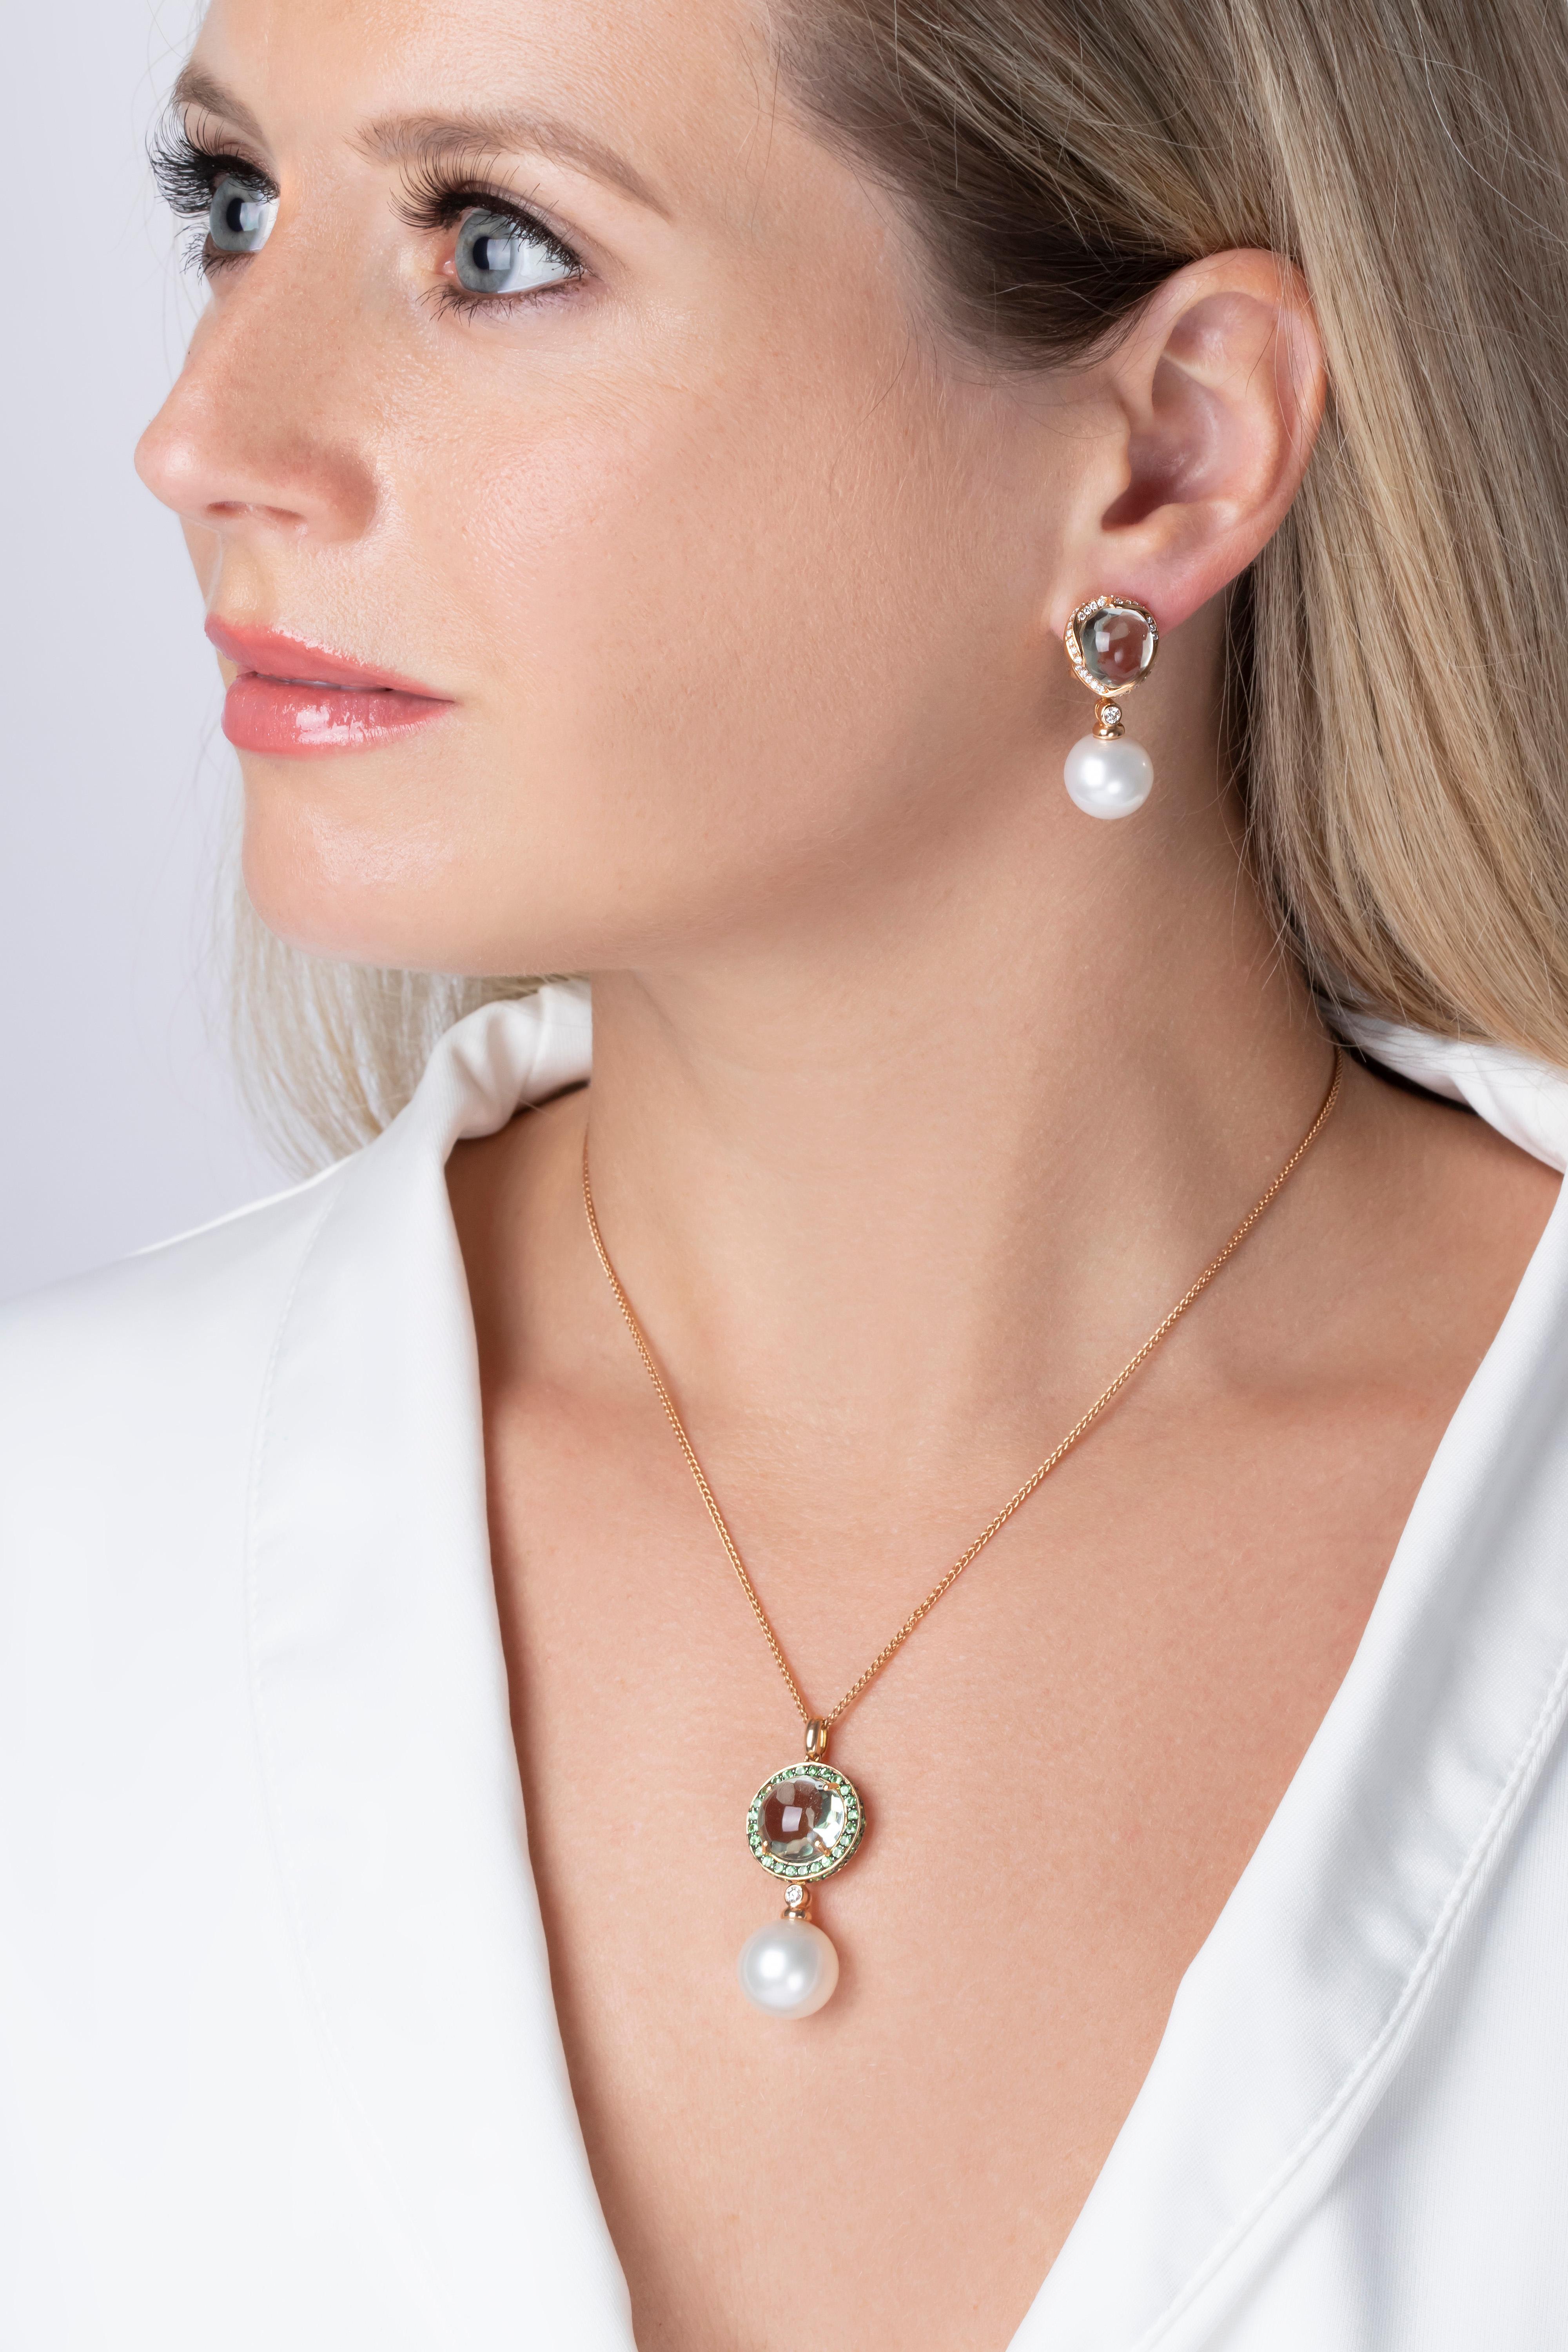 This bold pendant features a pretty faceted green amethyst in within a halo of Tsavorite garnets, set off with a lustrous 14.1mm South Sea pearl. This delightful necklace will add a sumptuous pop of colour to any outfit it is combined with.
Secured